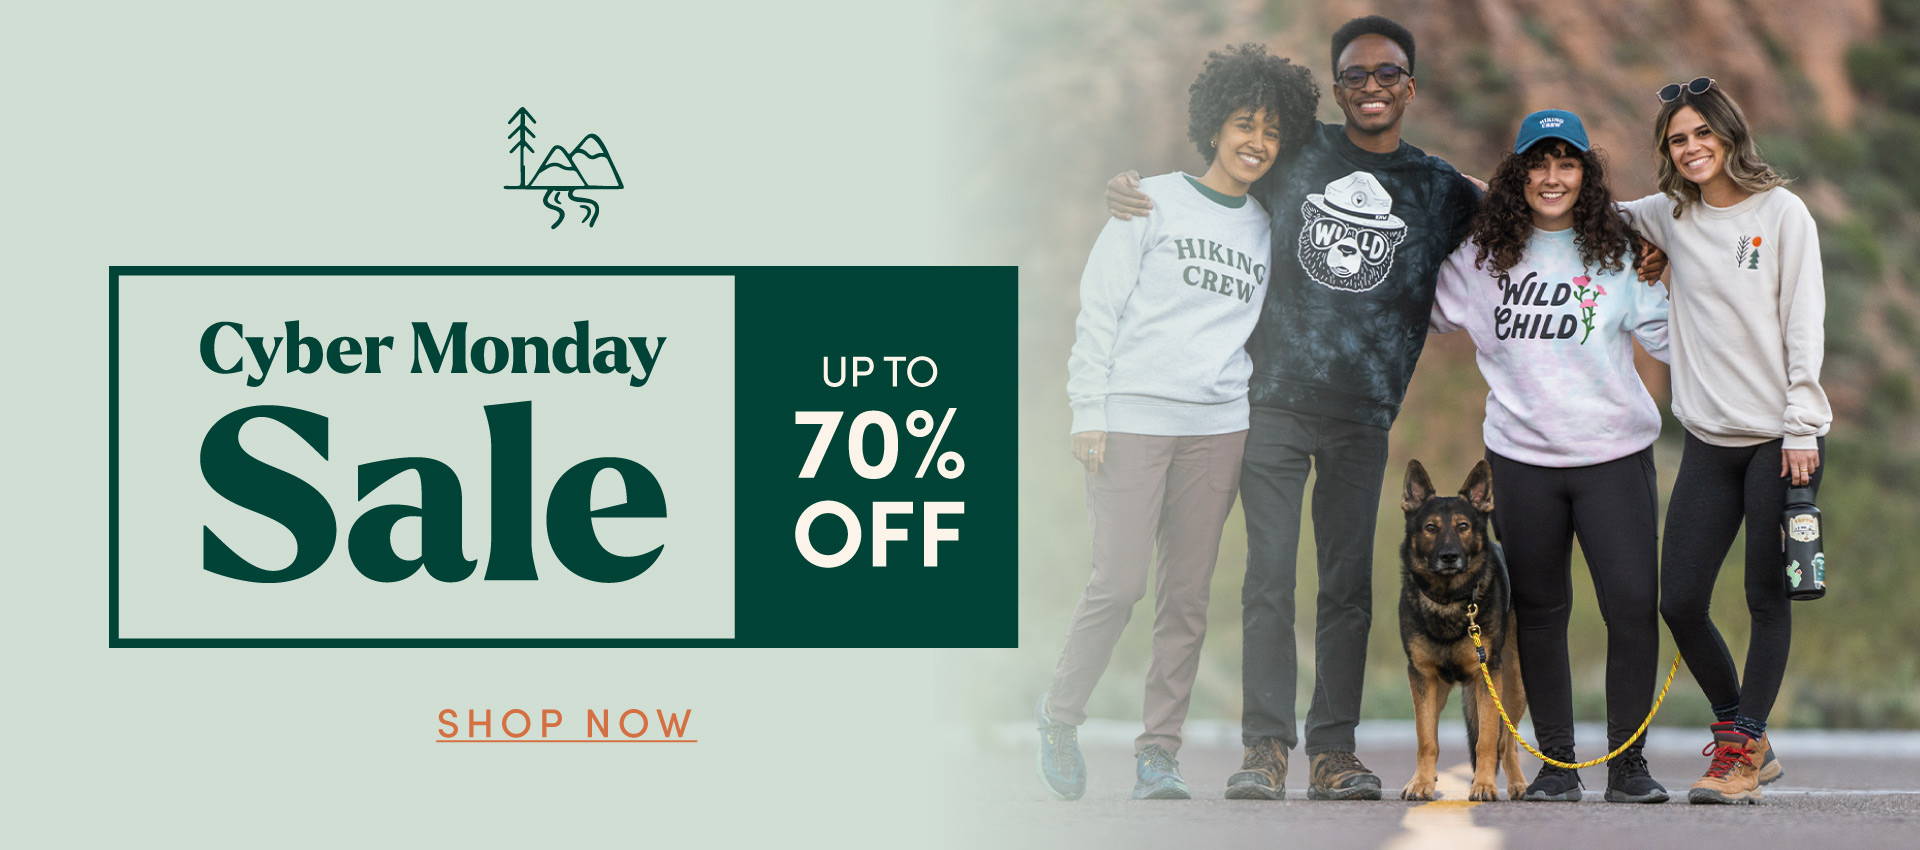 Cyber Monday Sale: Up to 70% Off. Shop the Sale